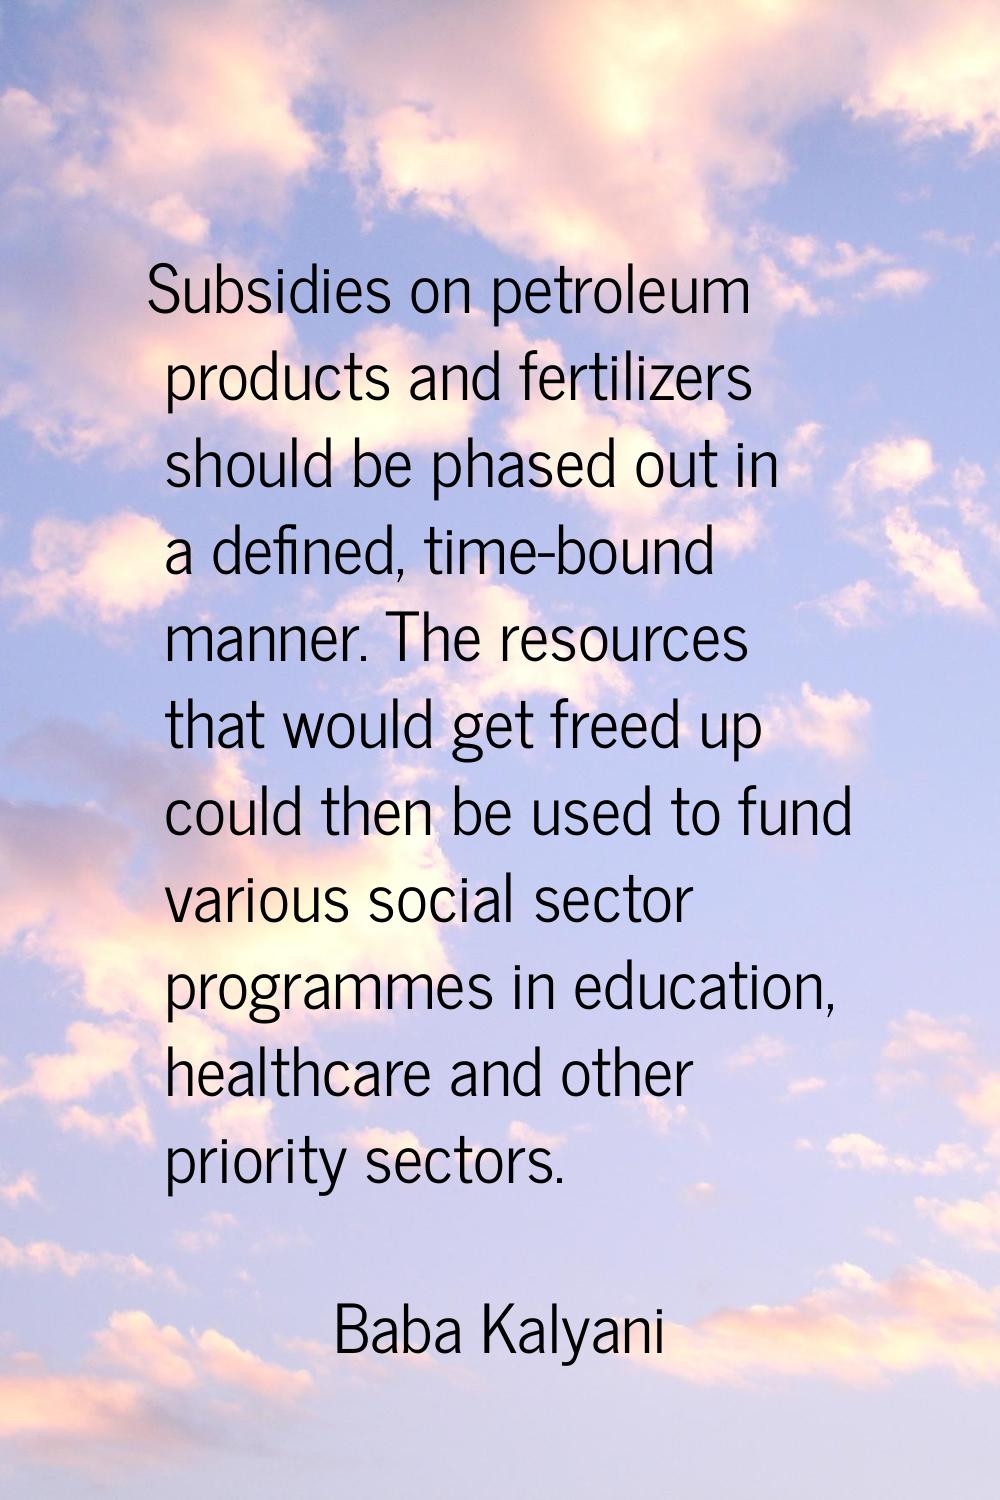 Subsidies on petroleum products and fertilizers should be phased out in a defined, time-bound manne